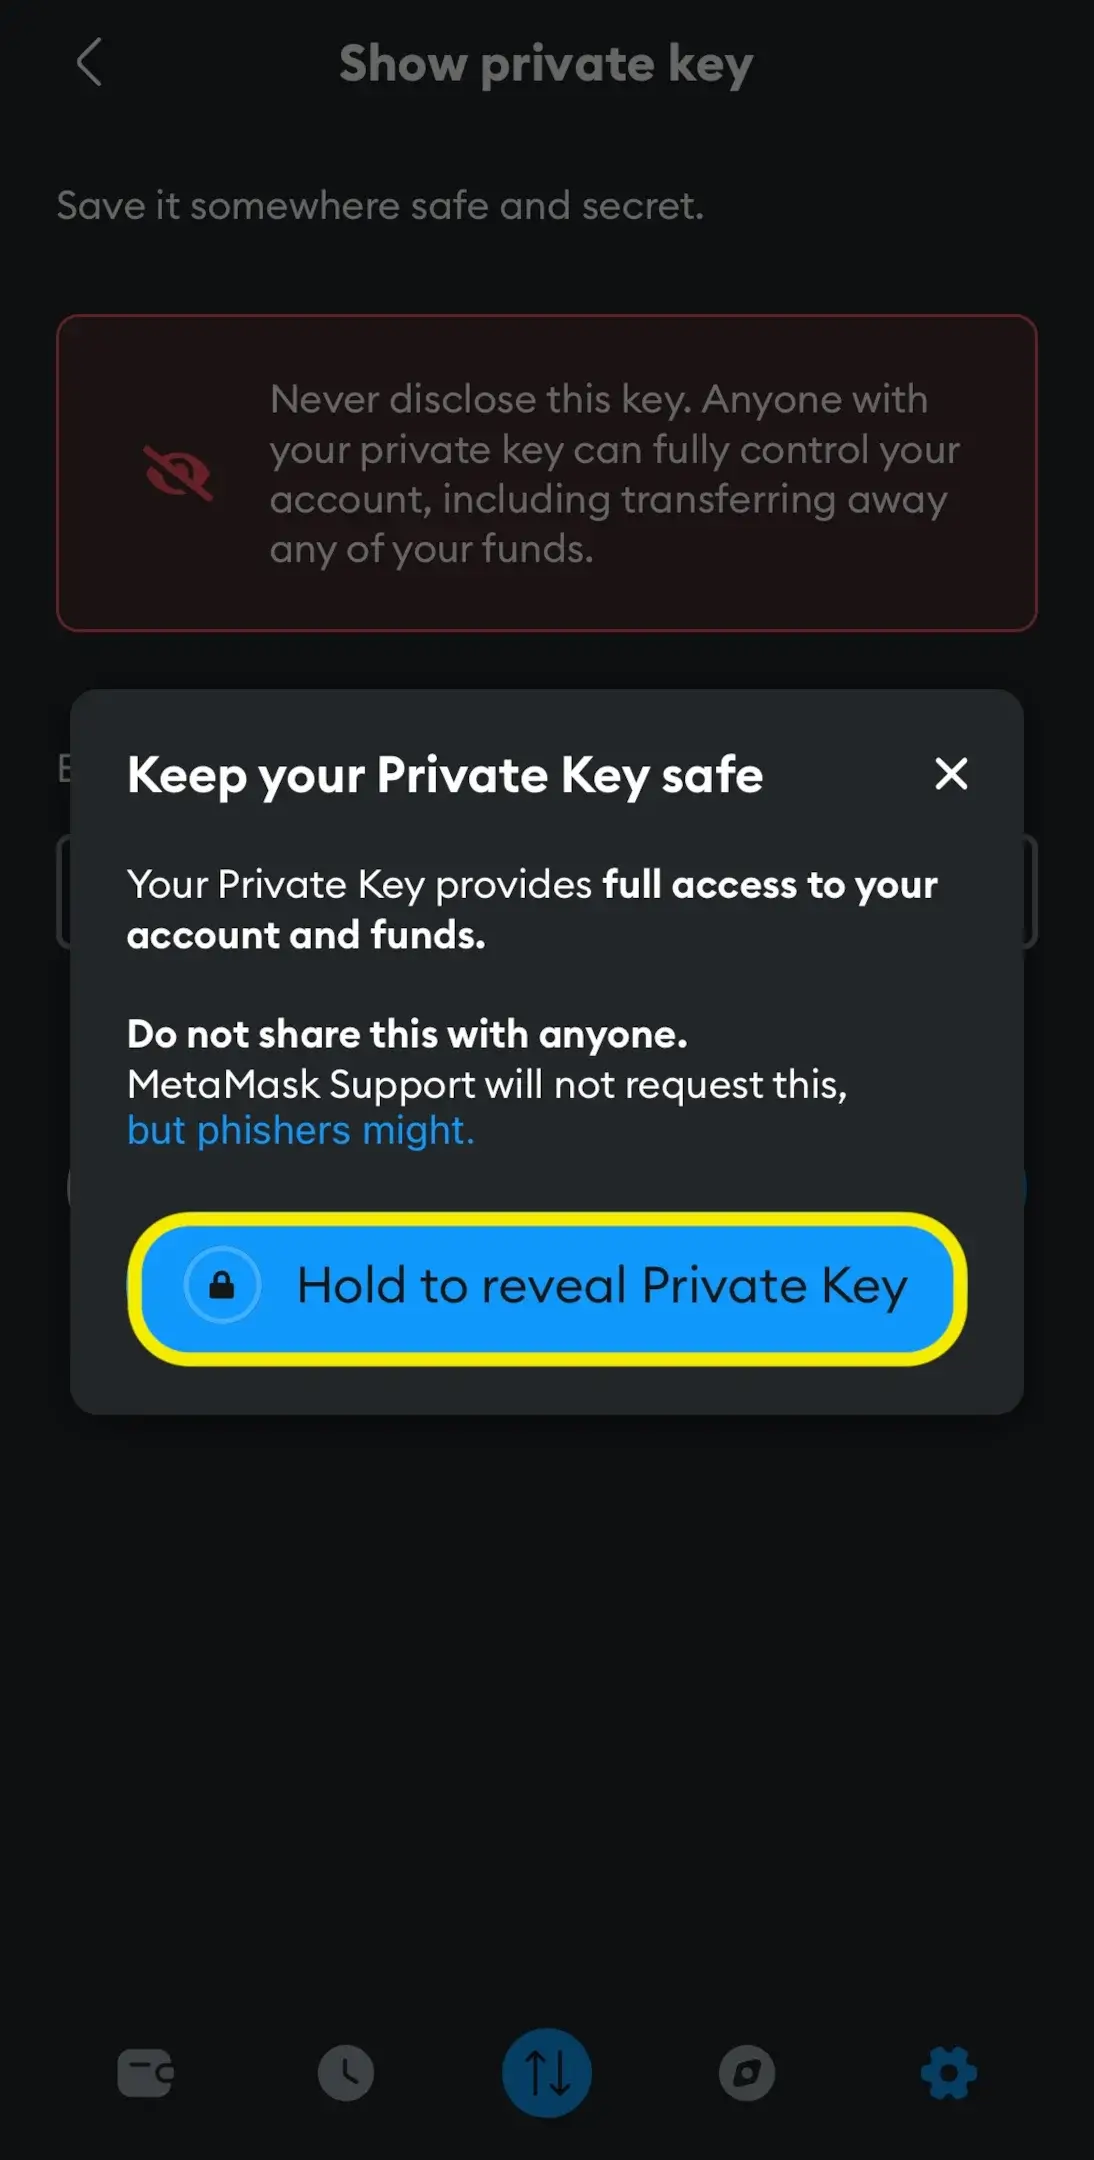 Hold to reveal the private key